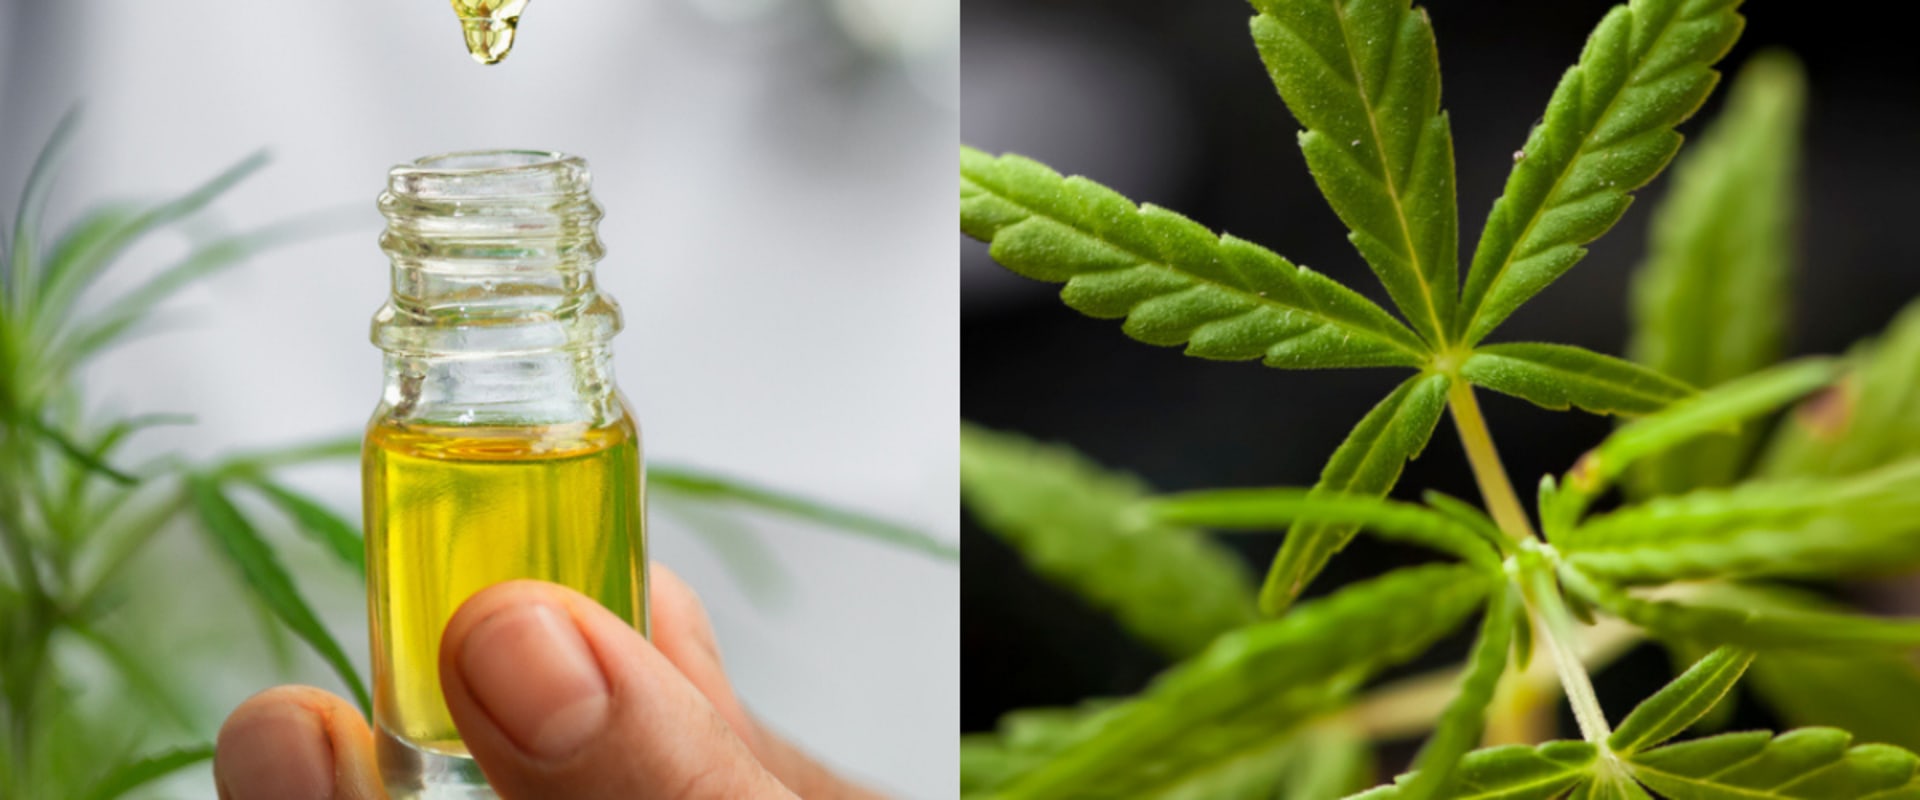 What is CBD Oil and What Are Its Benefits?